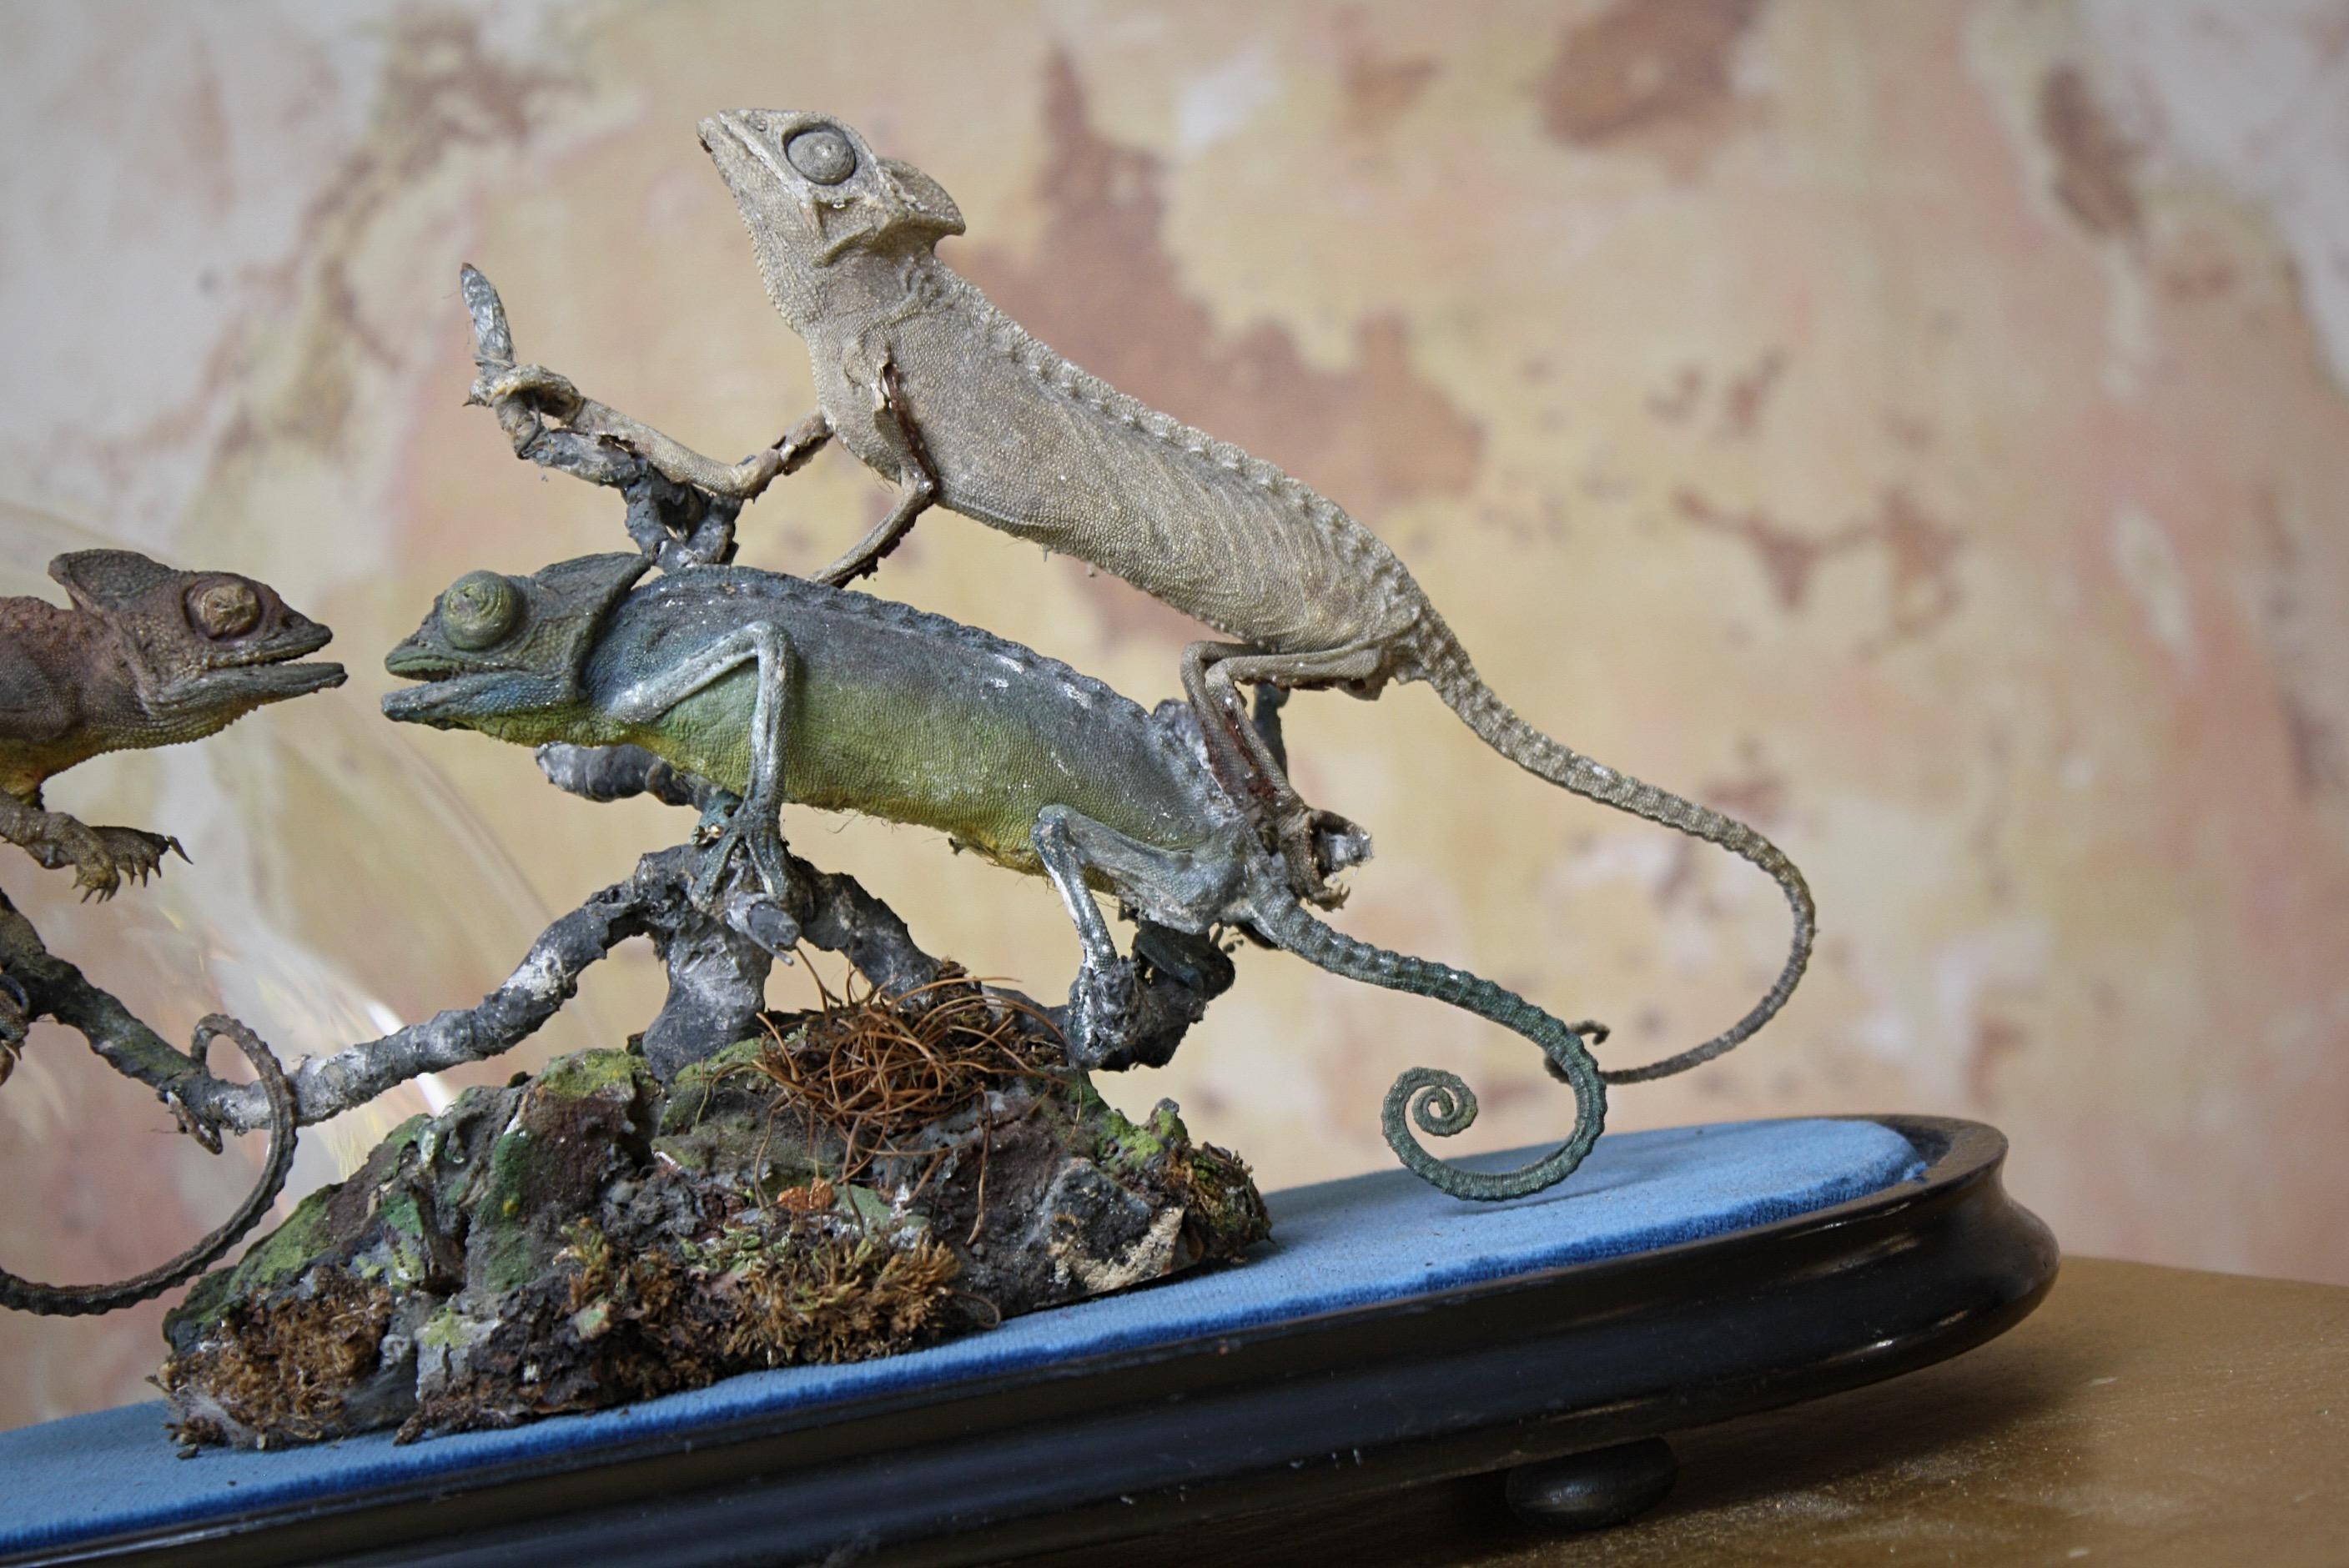 Trio of 19th Century Taxidermy Chameleon Lizards Under Glass Dome 1